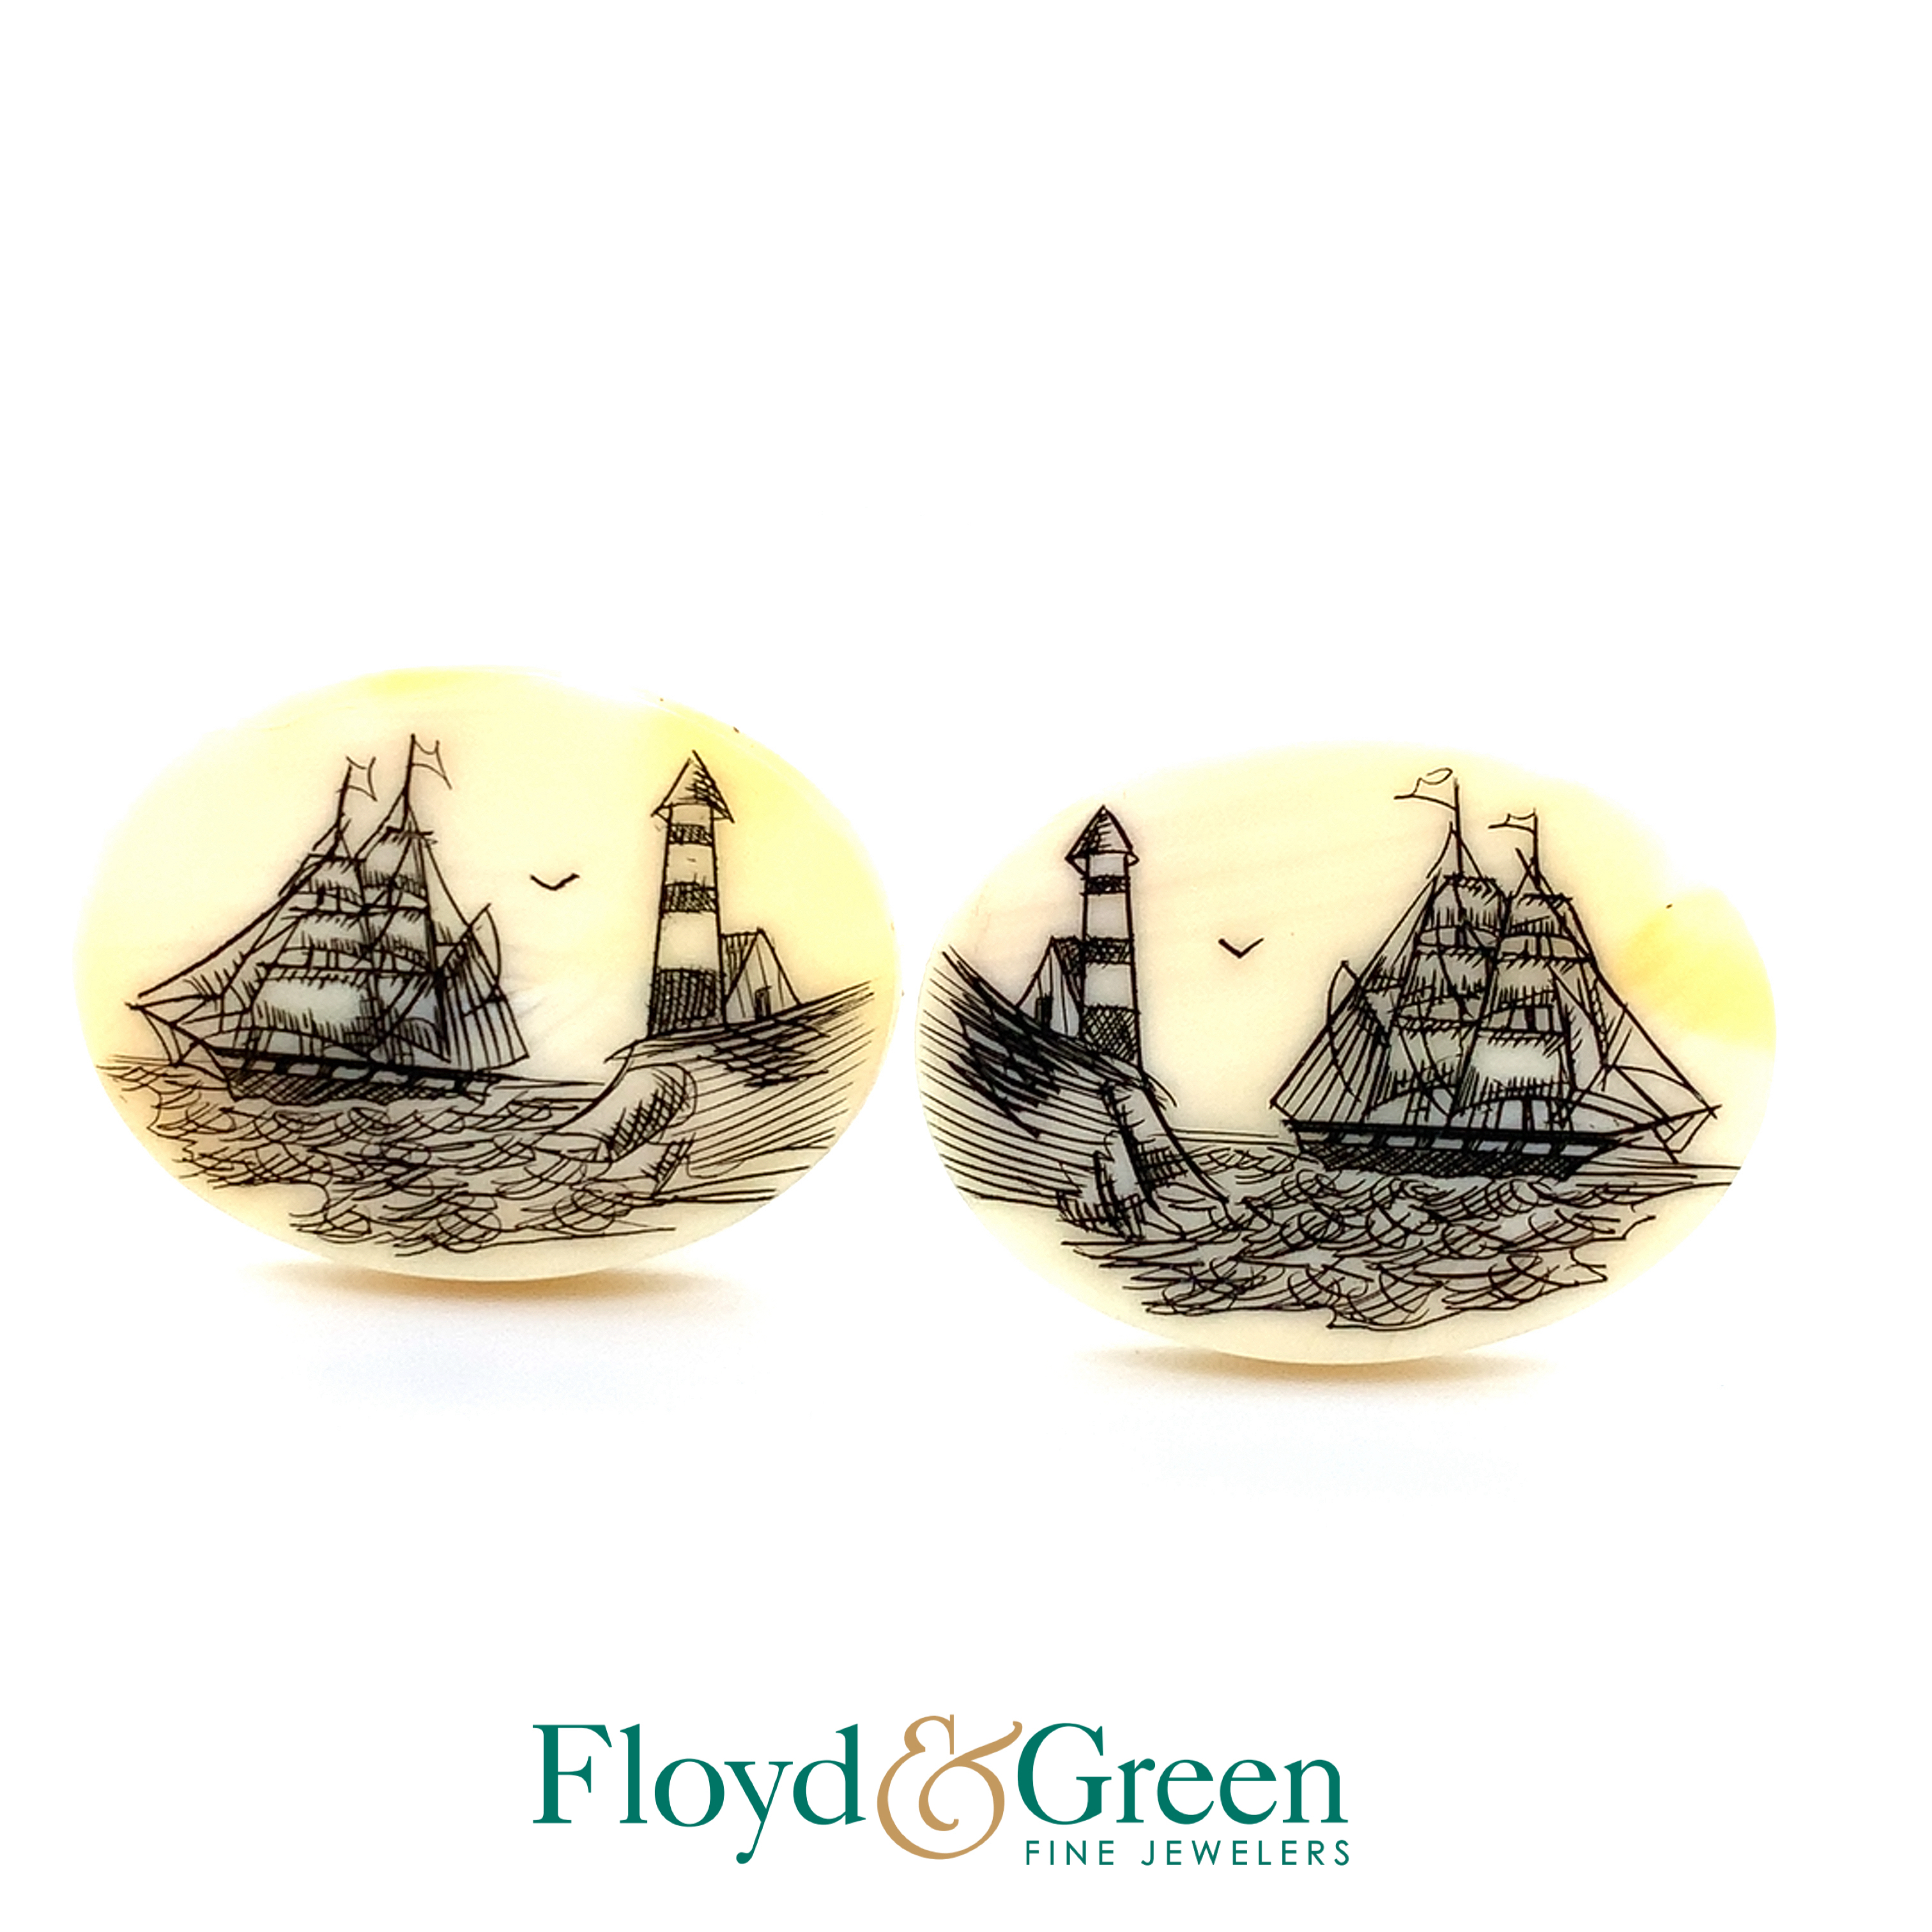 Sterling Silver Oval Cufflinks With Pictures Of Ships, 11.1g